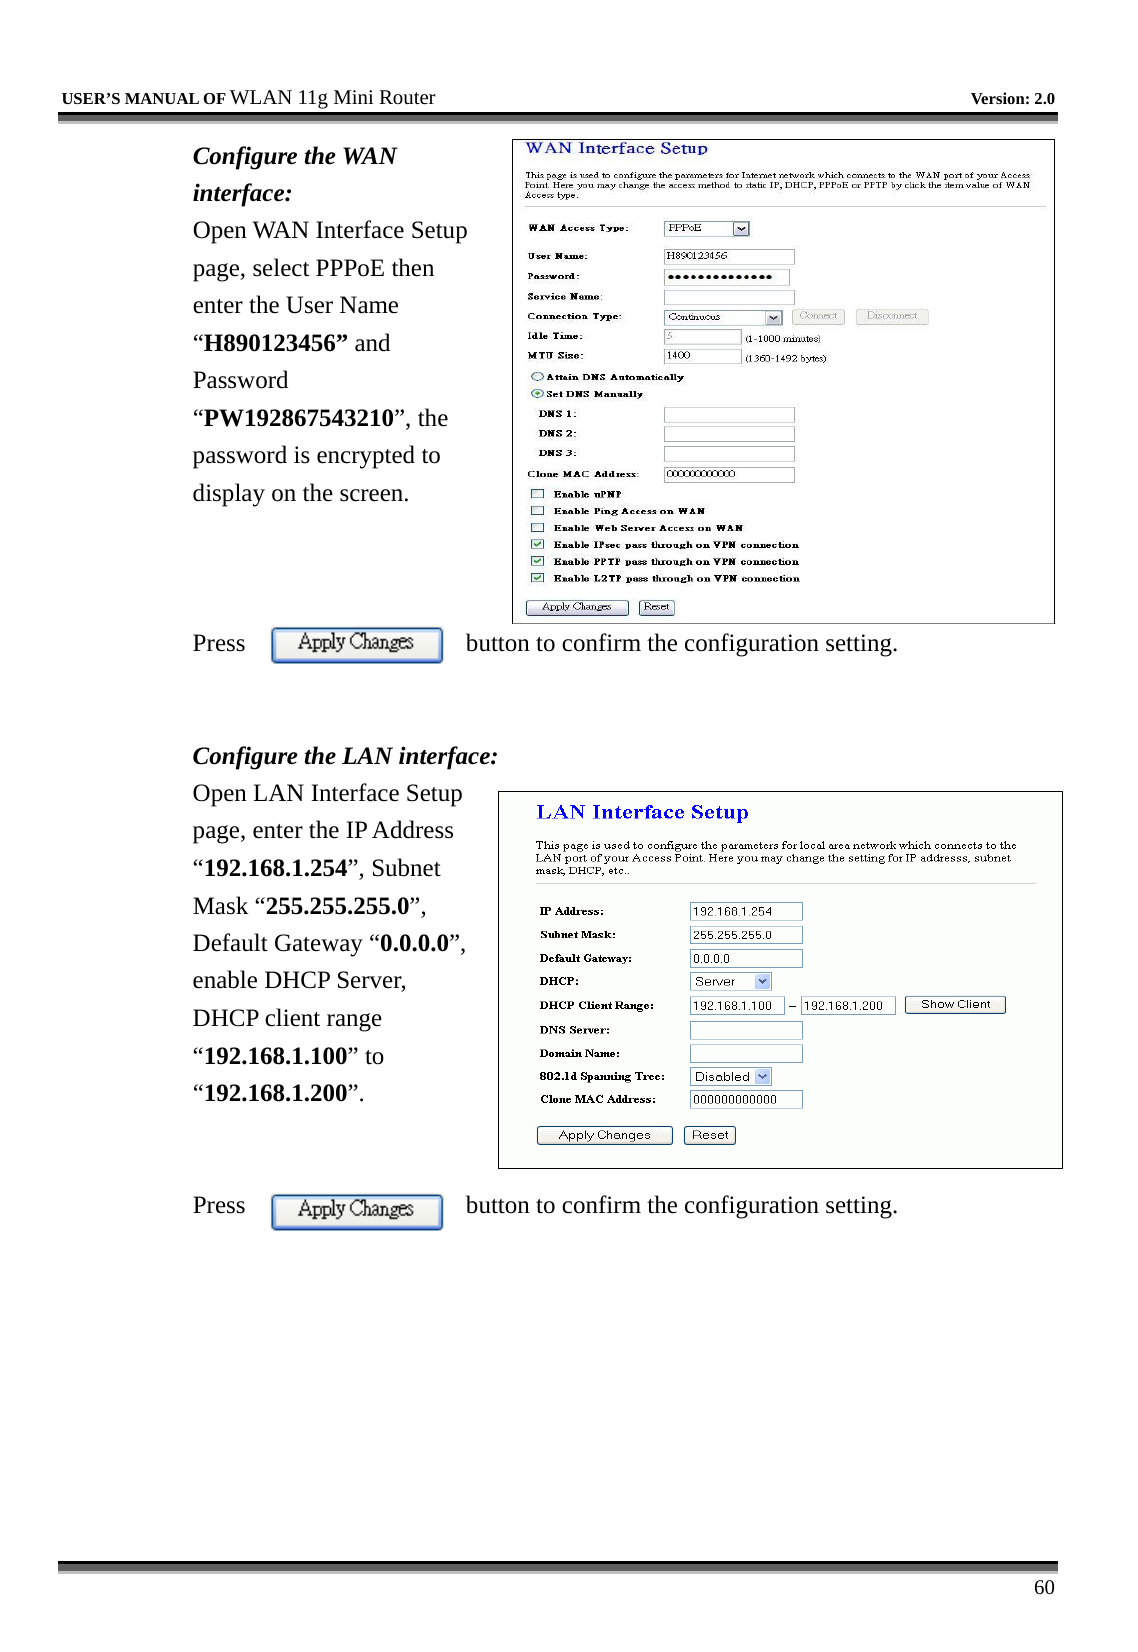   USER’S MANUAL OF WLAN 11g Mini Router   Version: 2.0     60 Configure the WAN interface: Open WAN Interface Setup page, select PPPoE then enter the User Name “H890123456” and Password “PW192867543210”, the password is encrypted to display on the screen.        Press  button to confirm the configuration setting.   Configure the LAN interface:  Open LAN Interface Setup page, enter the IP Address “192.168.1.254”, Subnet Mask “255.255.255.0”, Default Gateway “0.0.0.0”, enable DHCP Server, DHCP client range “192.168.1.100” to “192.168.1.200”.    Press  button to confirm the configuration setting.   